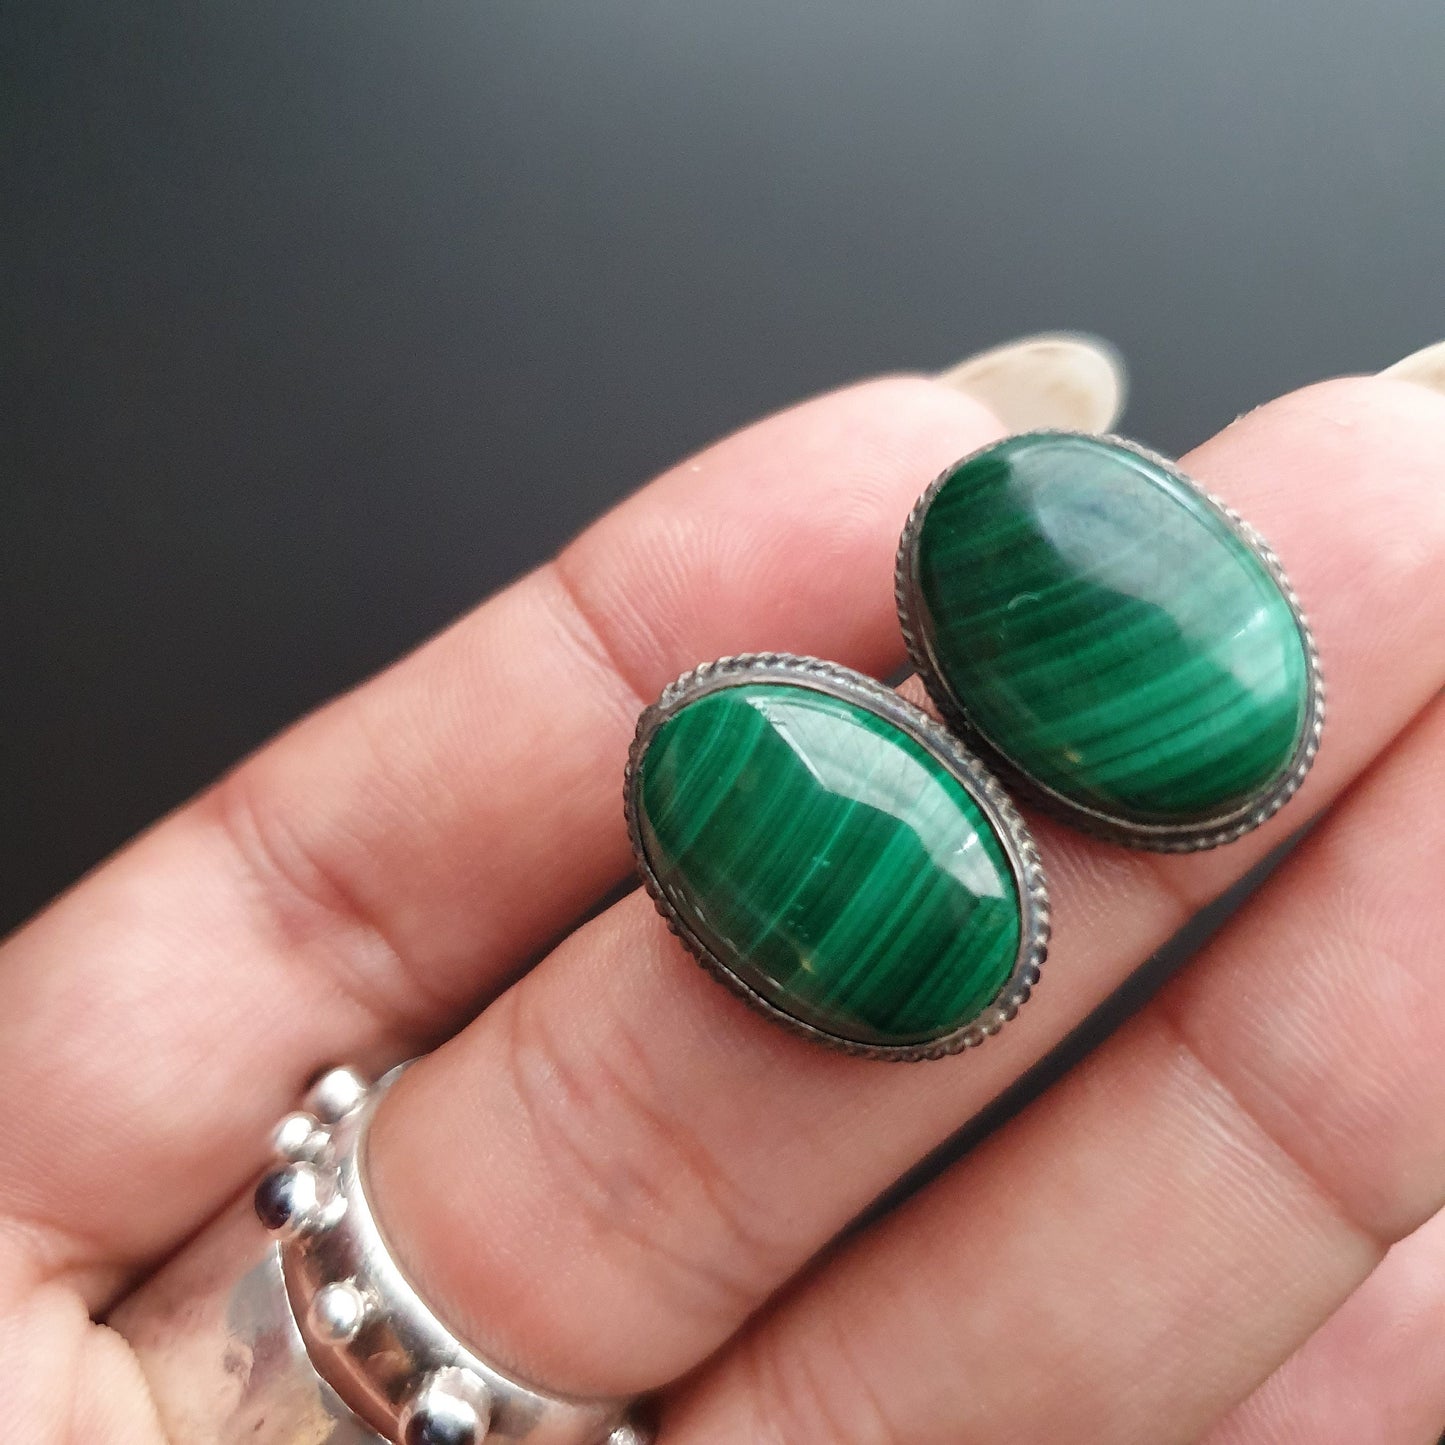 Studs, earrings, malachite, gemstone, sterling silver, gifts, vintage, handmade, free shipping, classic, statement,925, emerald green,